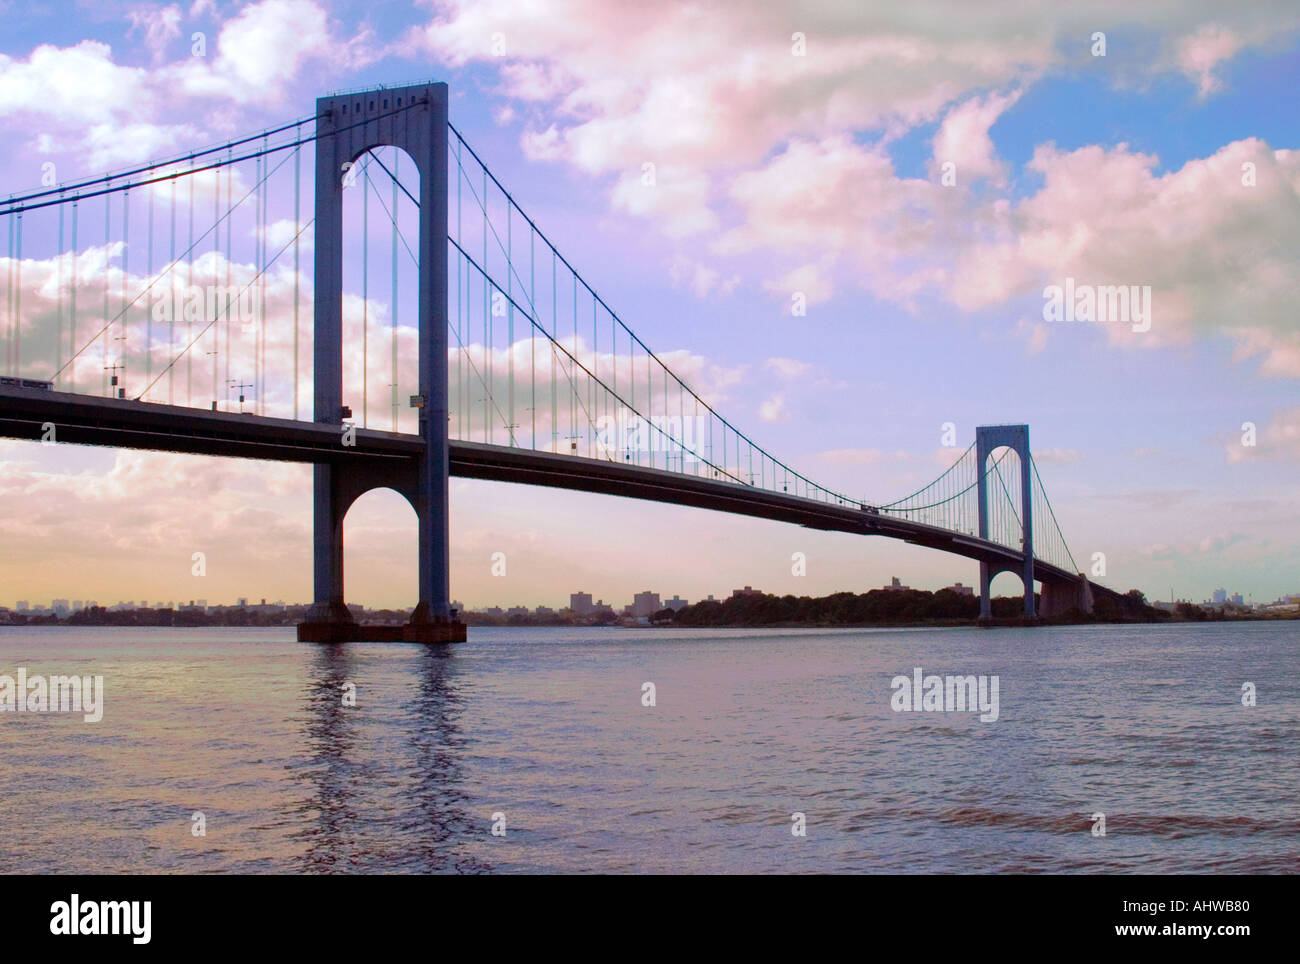 Whitestone Bridge NYC USA in daytime shot horizontally including the river water below with NYC skyline in background Stock Photo